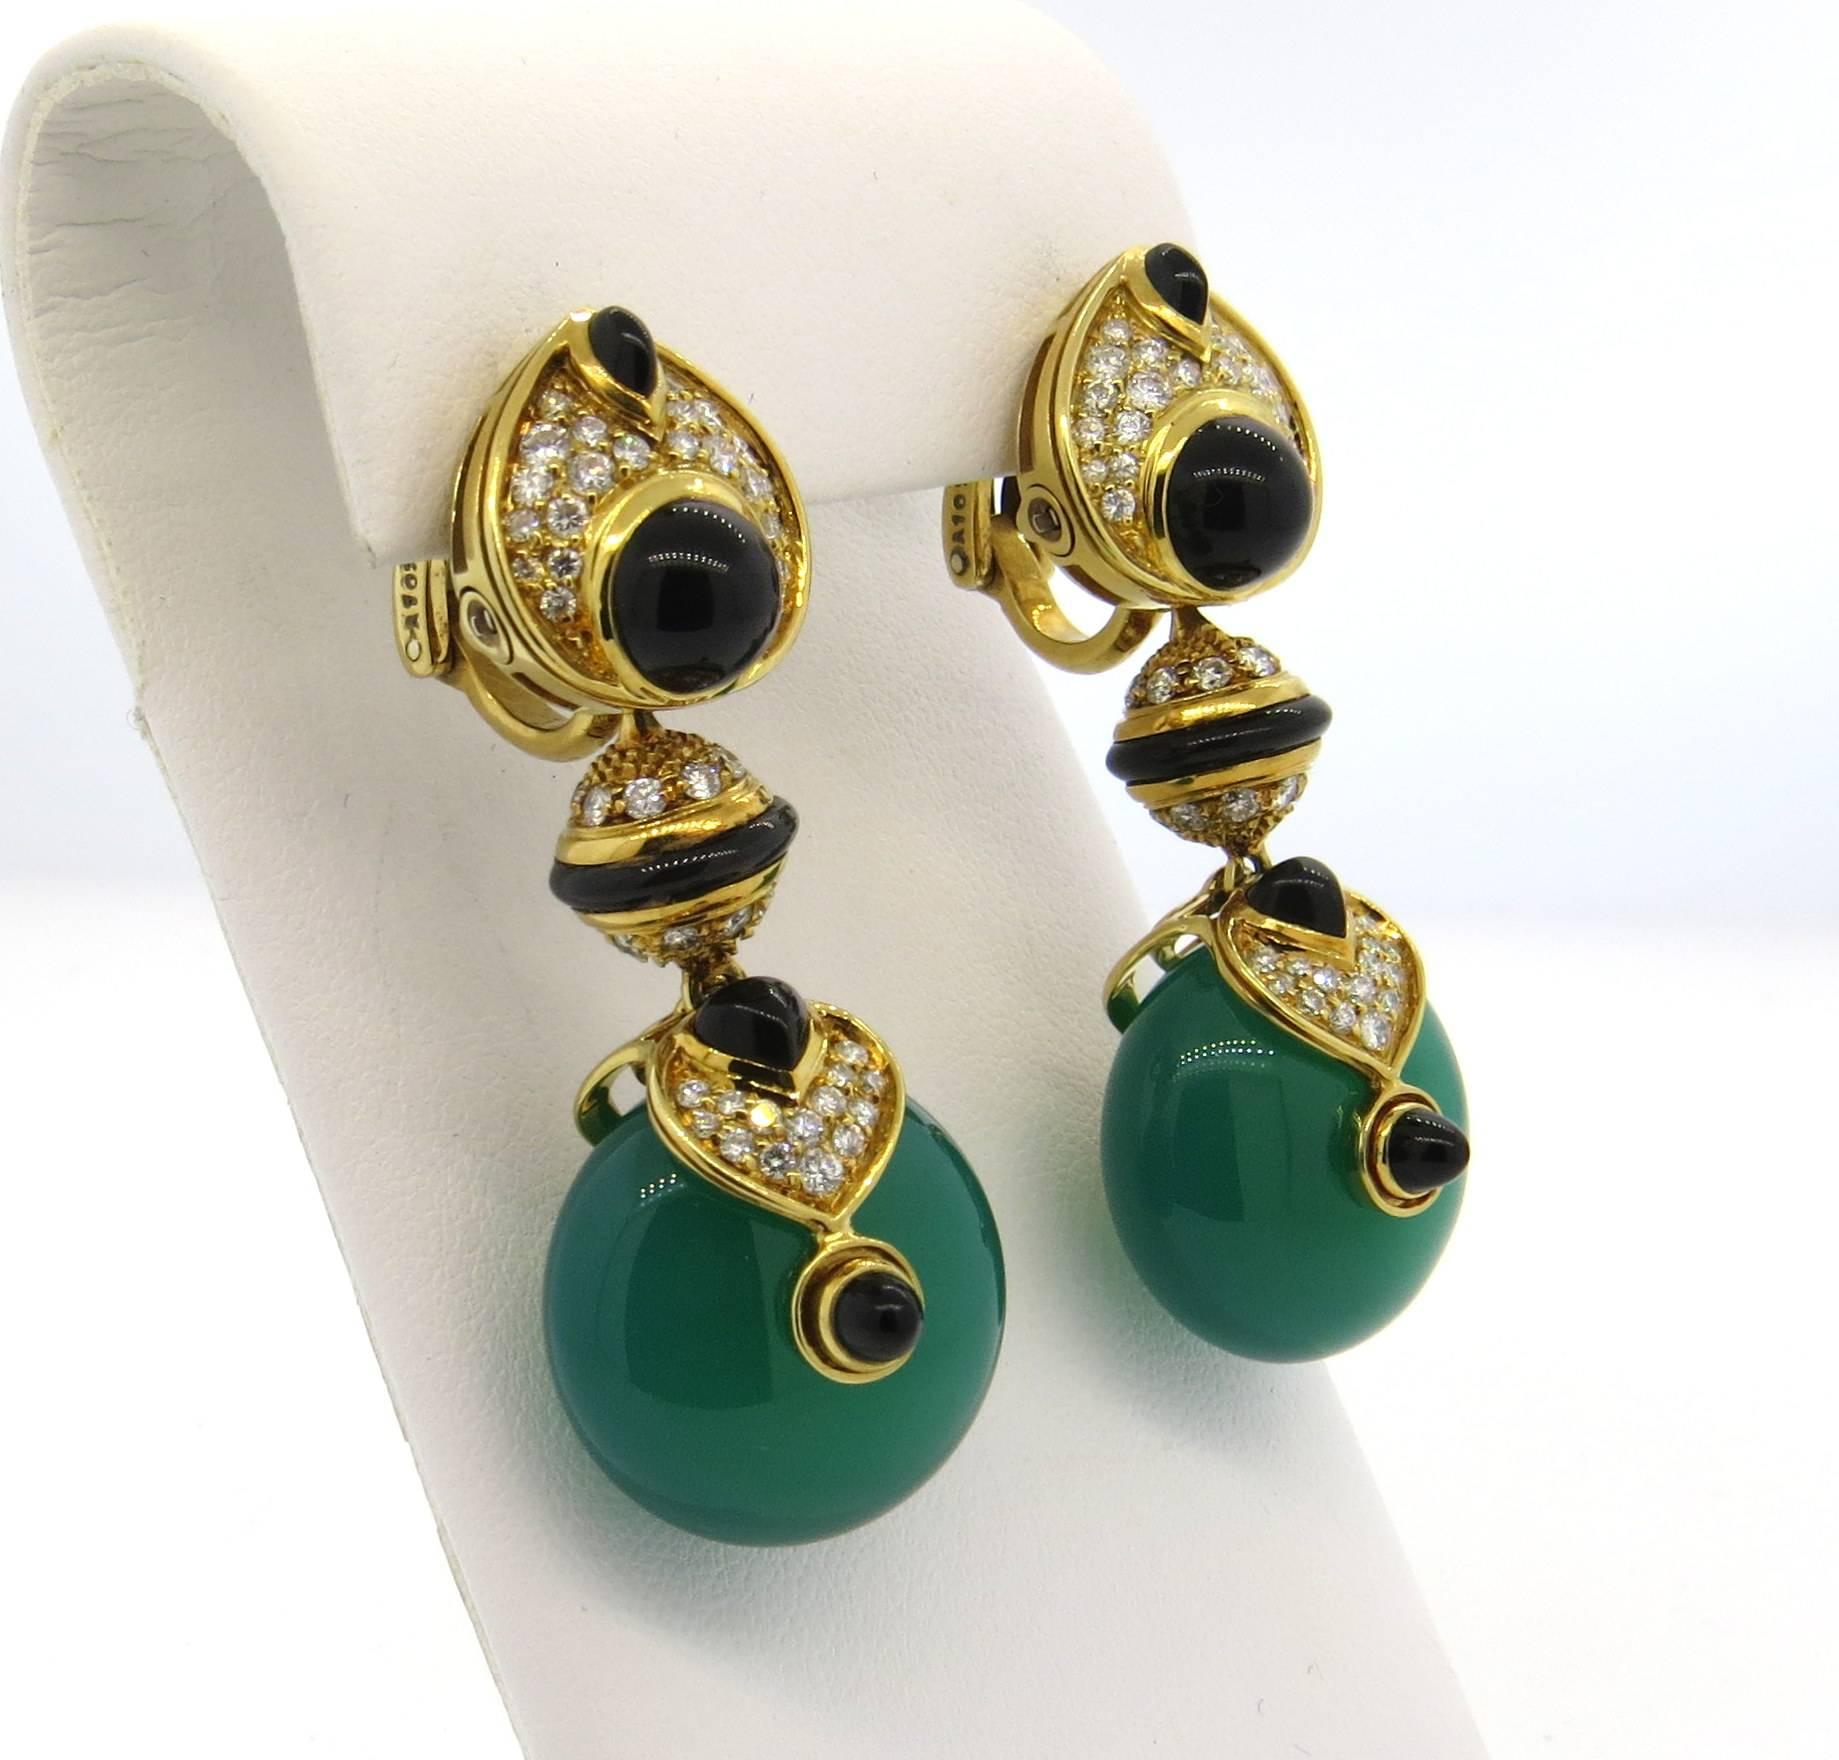 A pair of impressive 18k yellow gold drop earrings, crafted by Marina B, featuring four pairs of multi color interchangeable 20mm crystal drops. Earrings are decorated with black jade and approx. 1.75ctw in G/VS diamonds. Earrings are 50mm long.